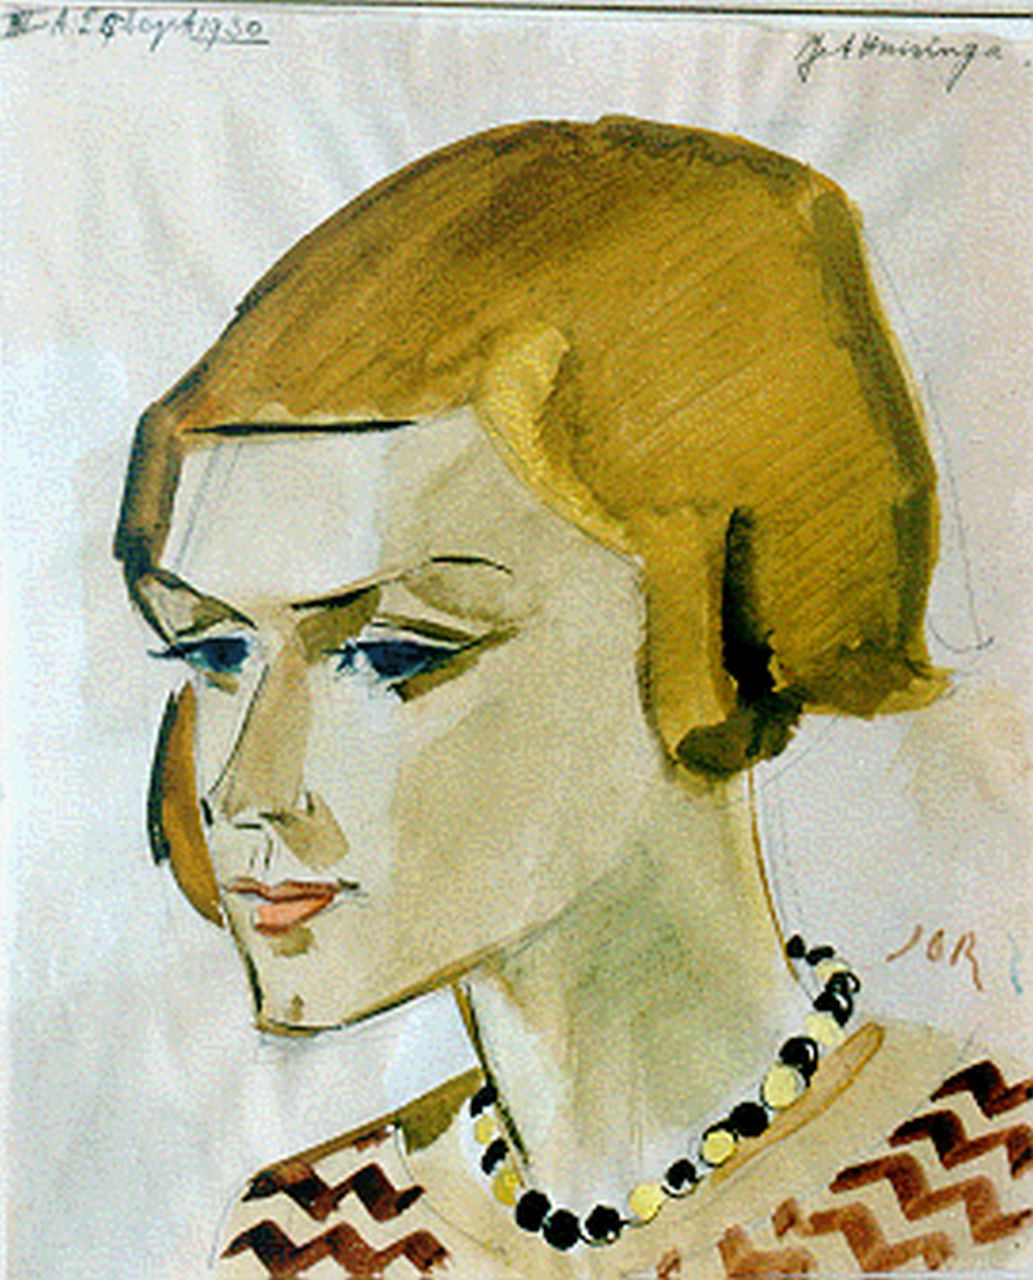 Jordens J.G.  | 'Jan' Gerrit Jordens, A portrait of Jet Huisinga, chalk and watercolour on paper 28.9 x 23.8 cm, signed l.r. with monogram and executed 25 Sept 1930